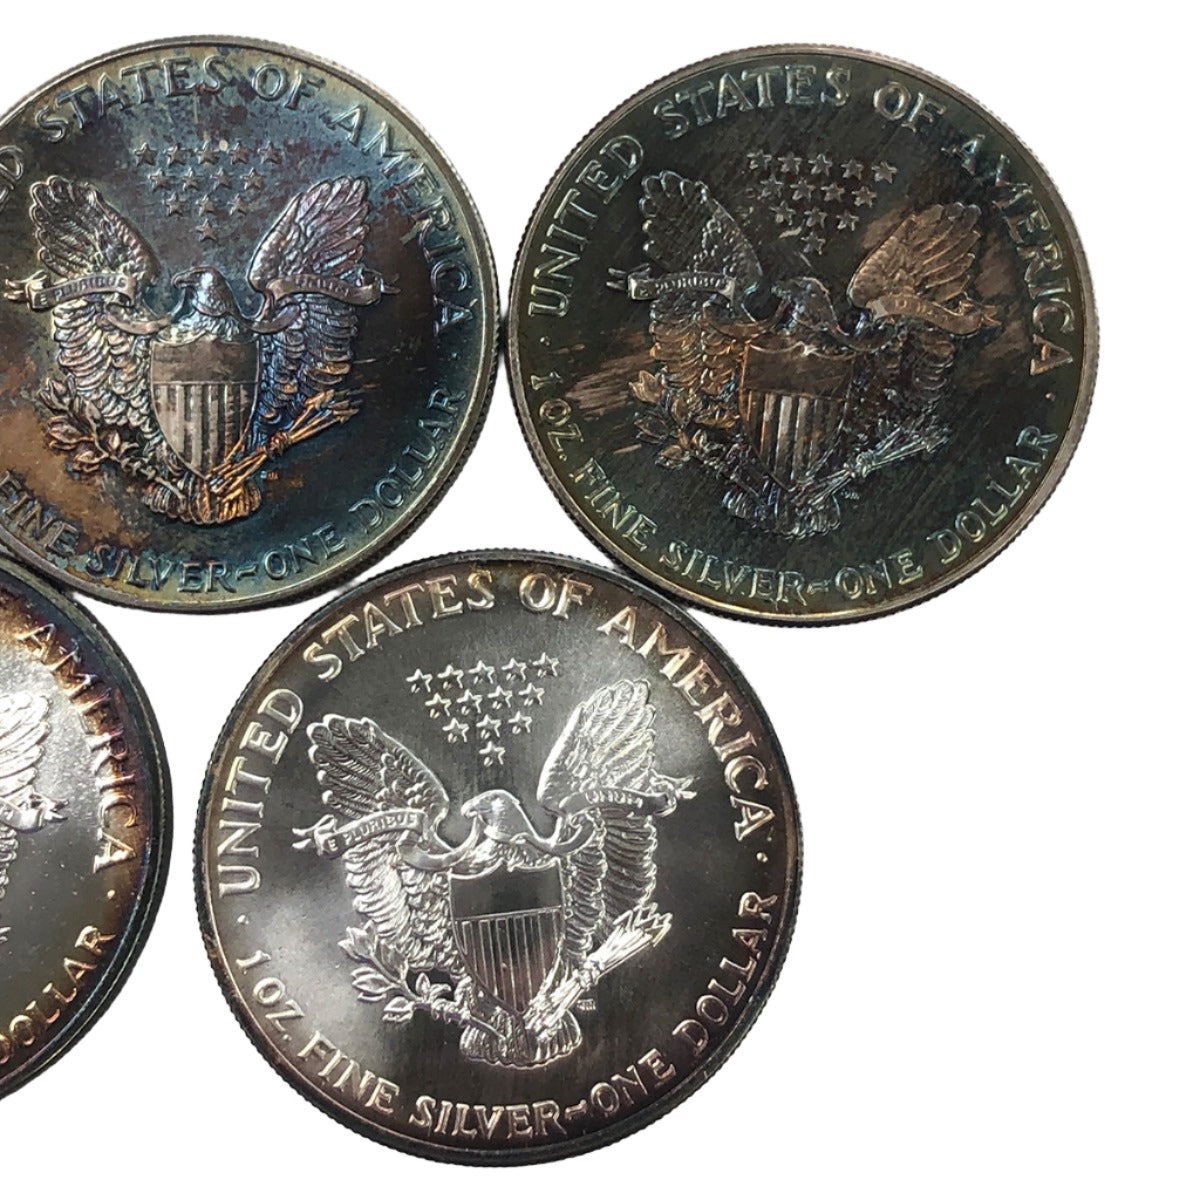 Lot of 5 Toned 1 oz American Silver Eagles